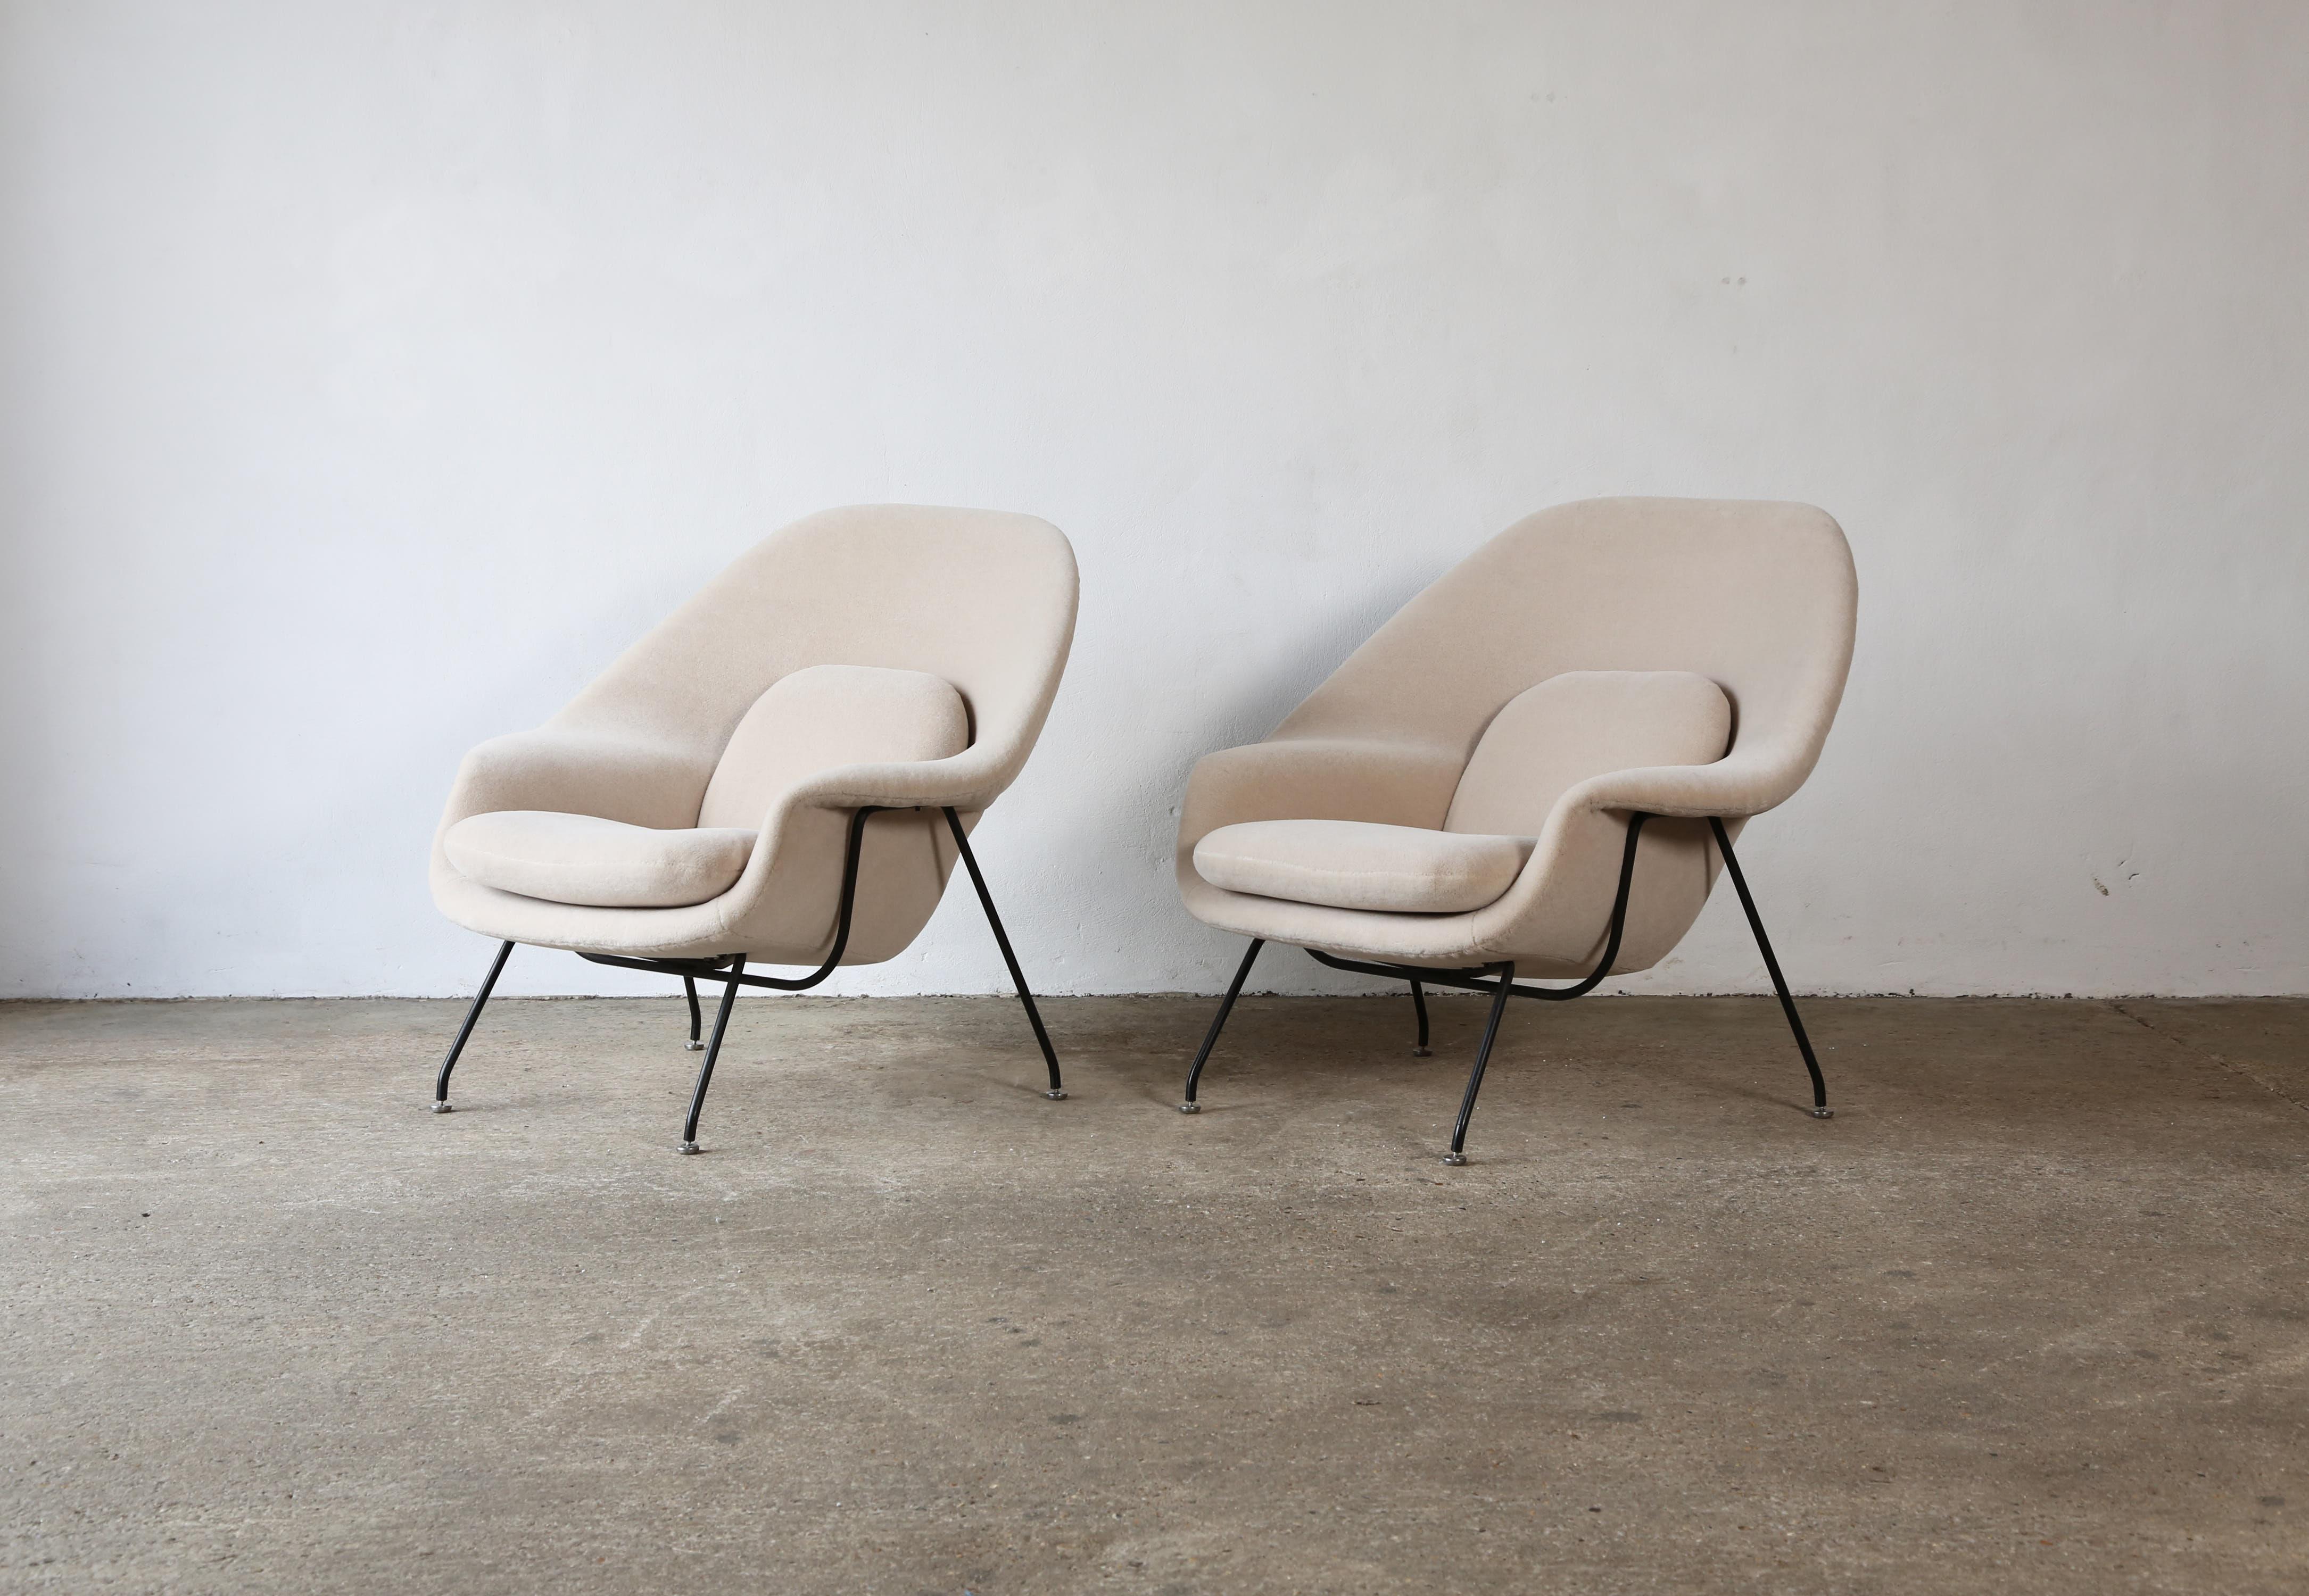 Steel Rare Early Pair of Eero Saarinen Womb Chairs and Ottomans, Knoll, USA, 1950s For Sale